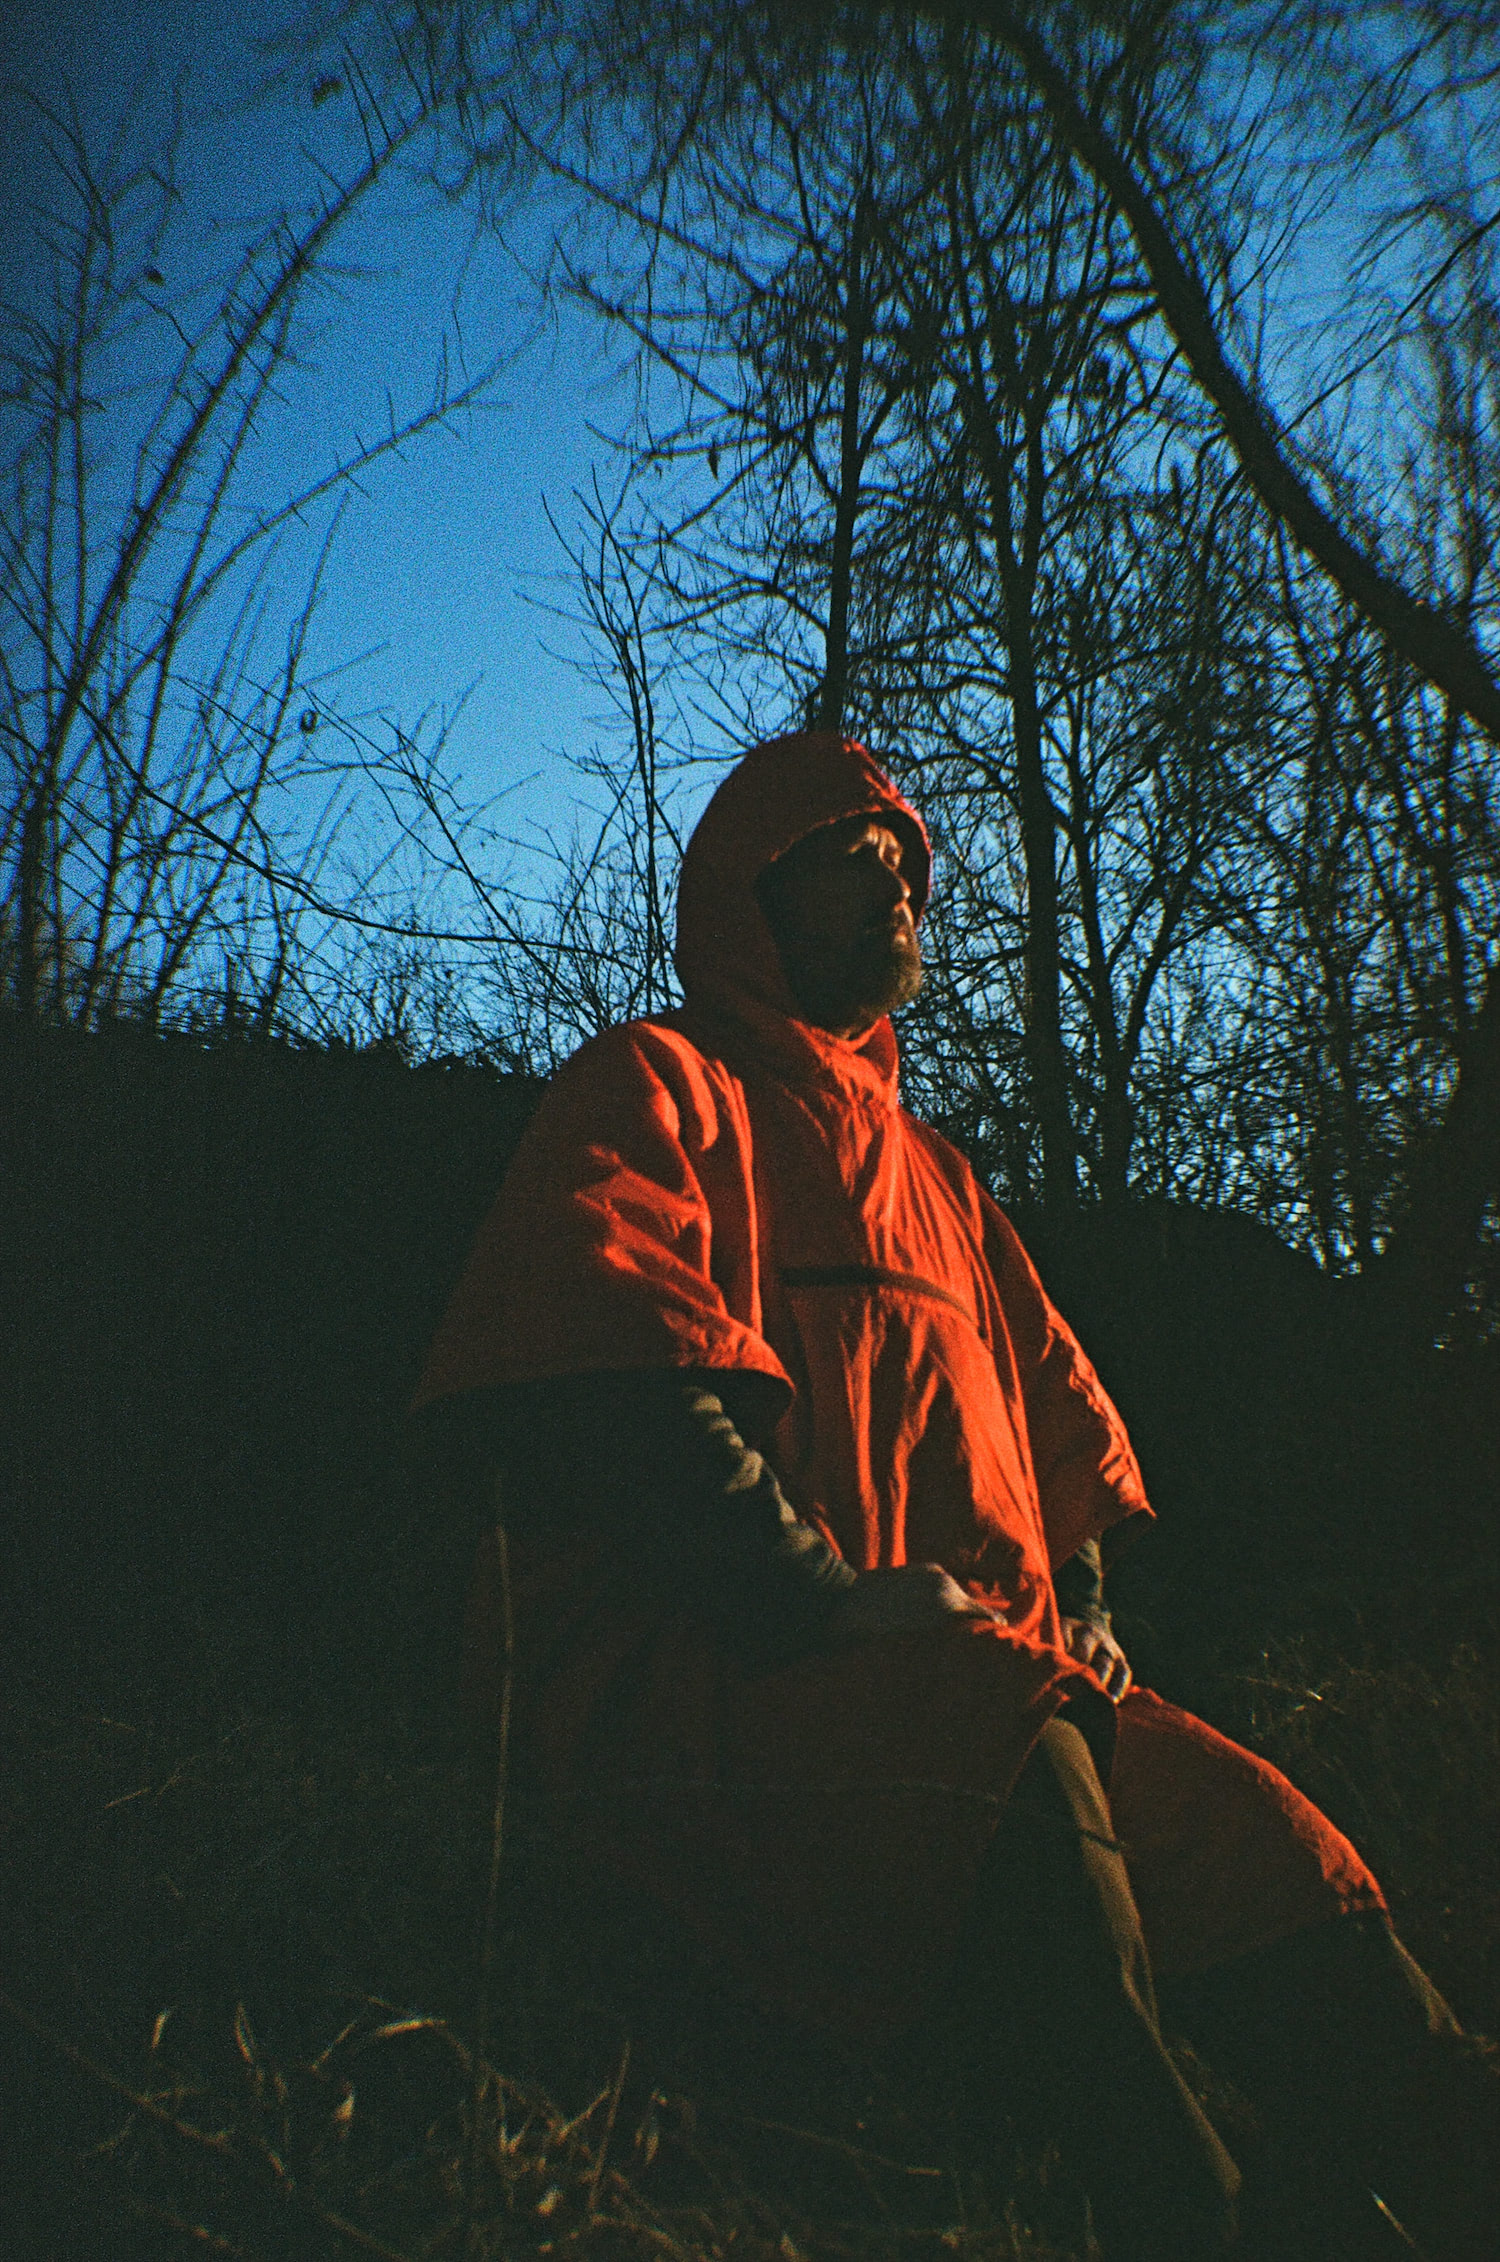 Sitting on a log, a man wearing an orange poncho absorbs the last of the day's sunshine.